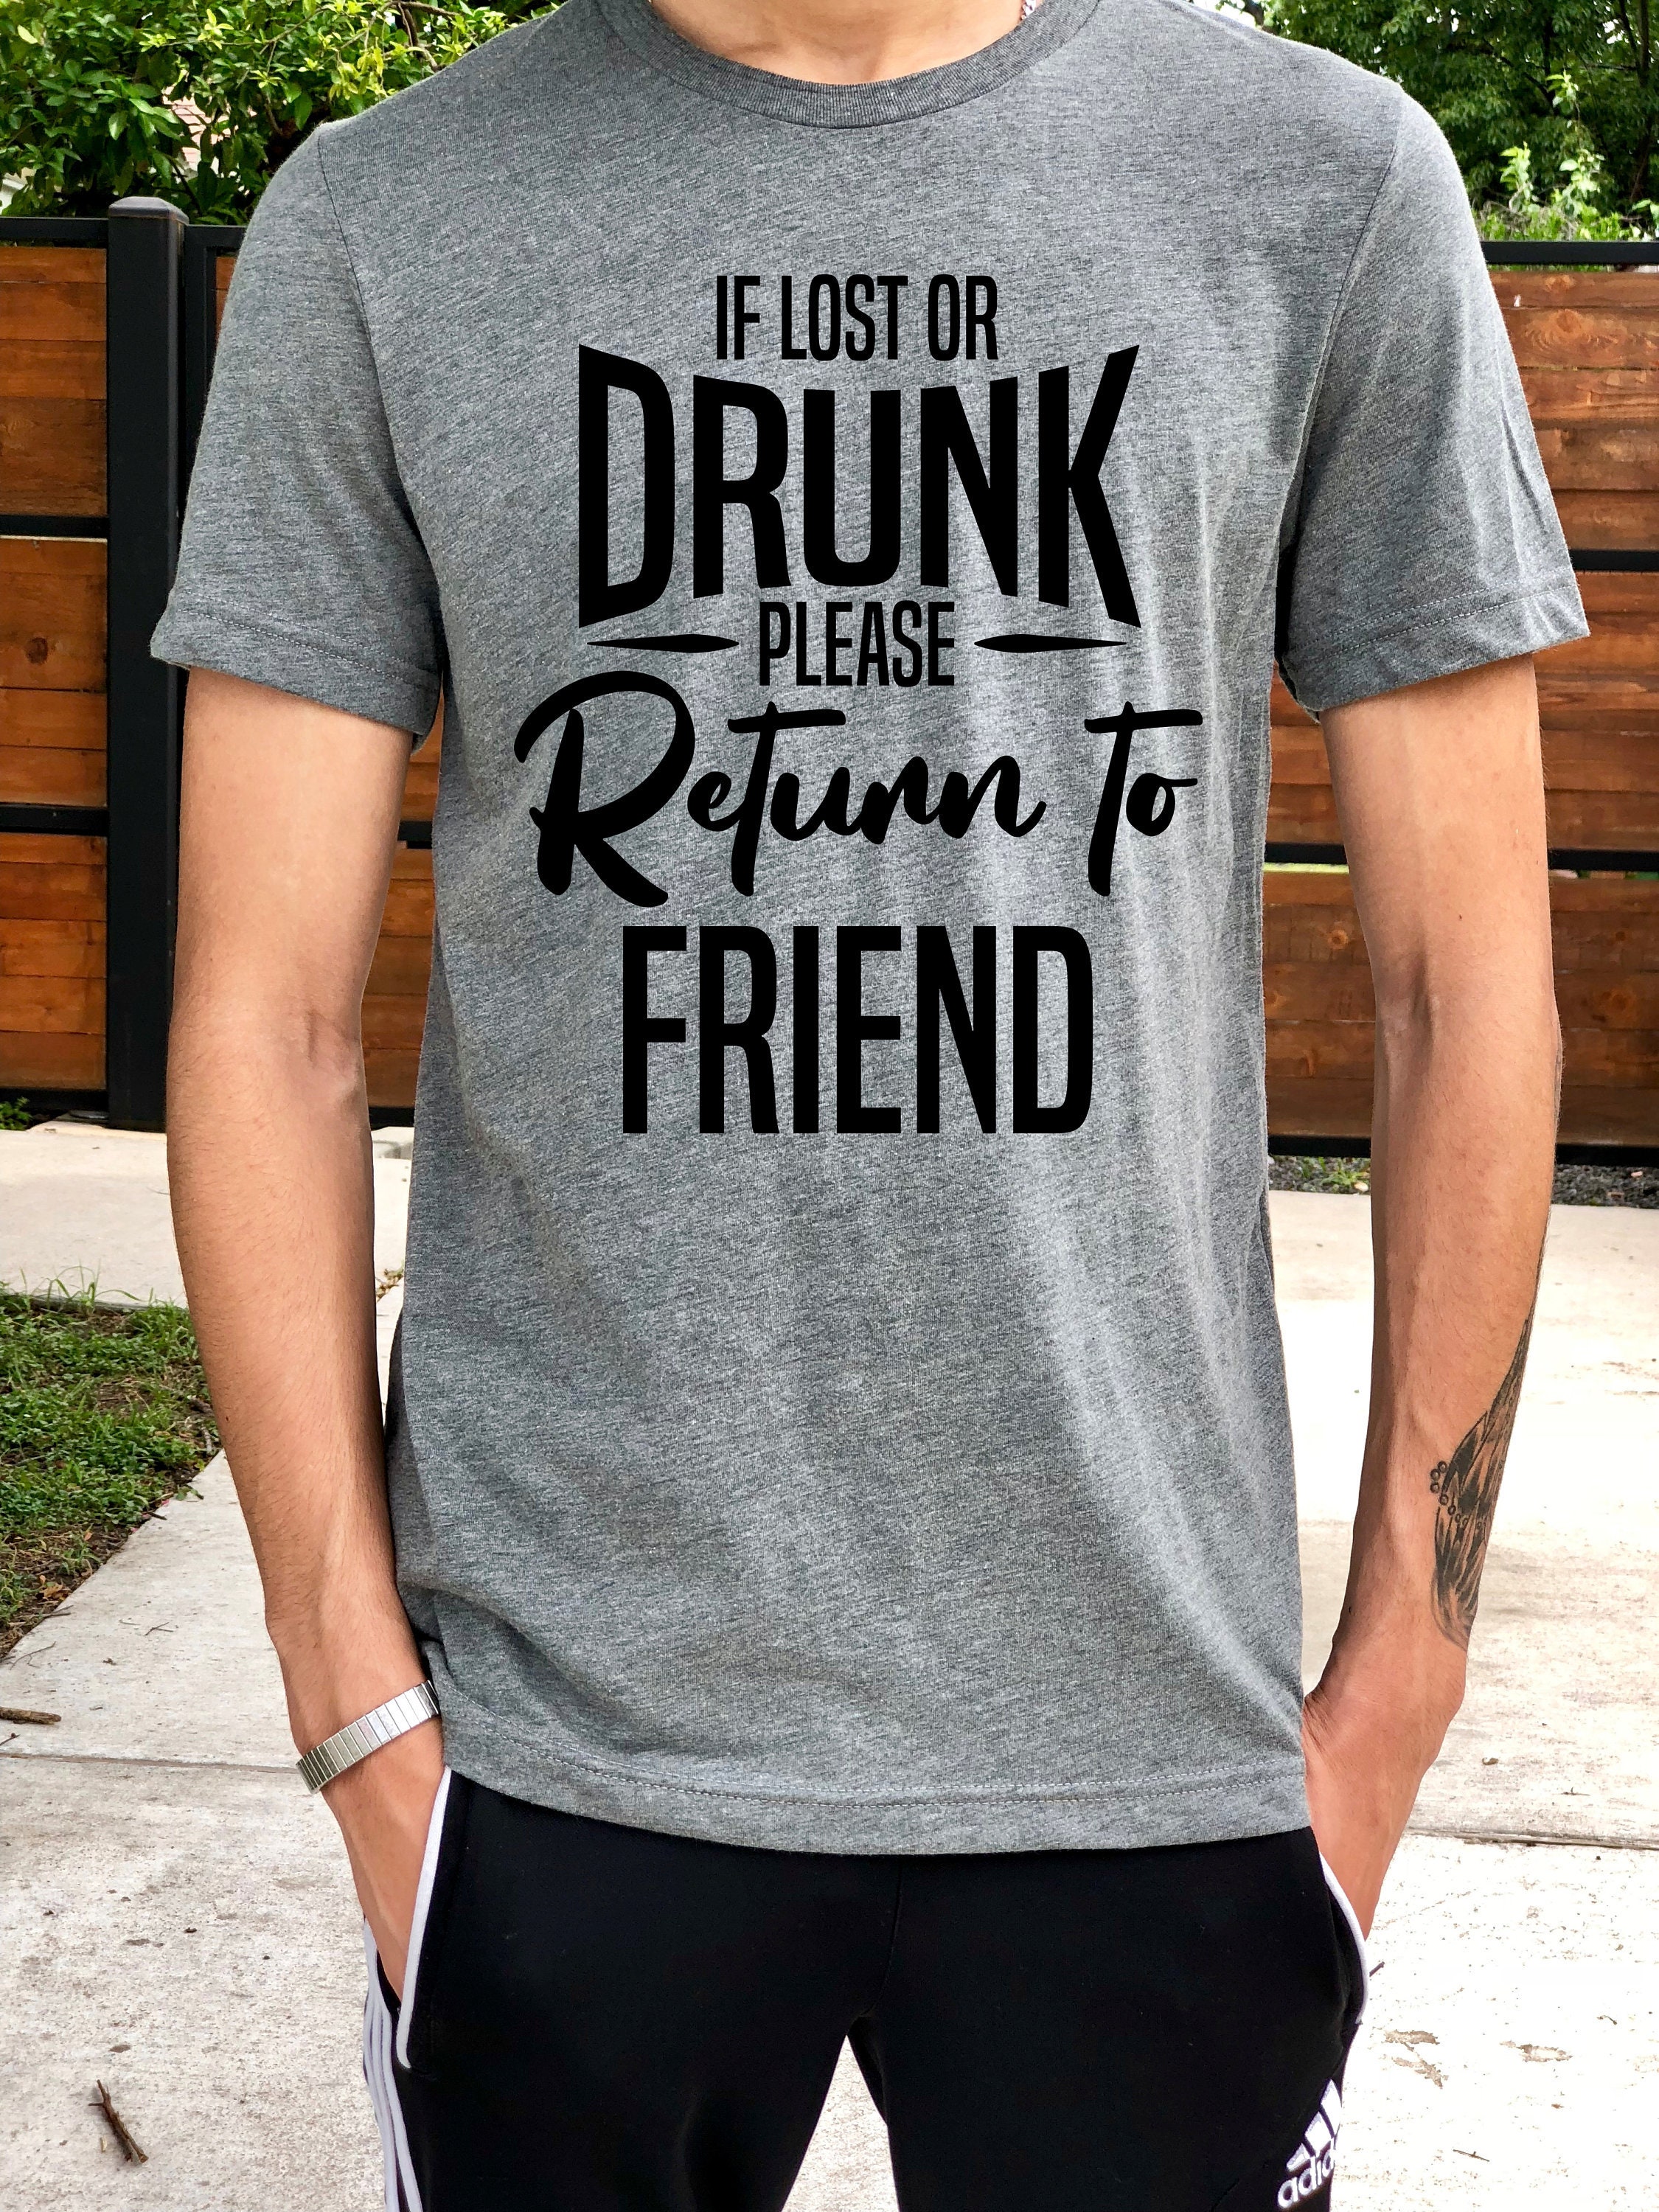 Nægte bomuld præcedens Funny Party Shirt. If Lost or Drunk Please Return to Friend. - Etsy